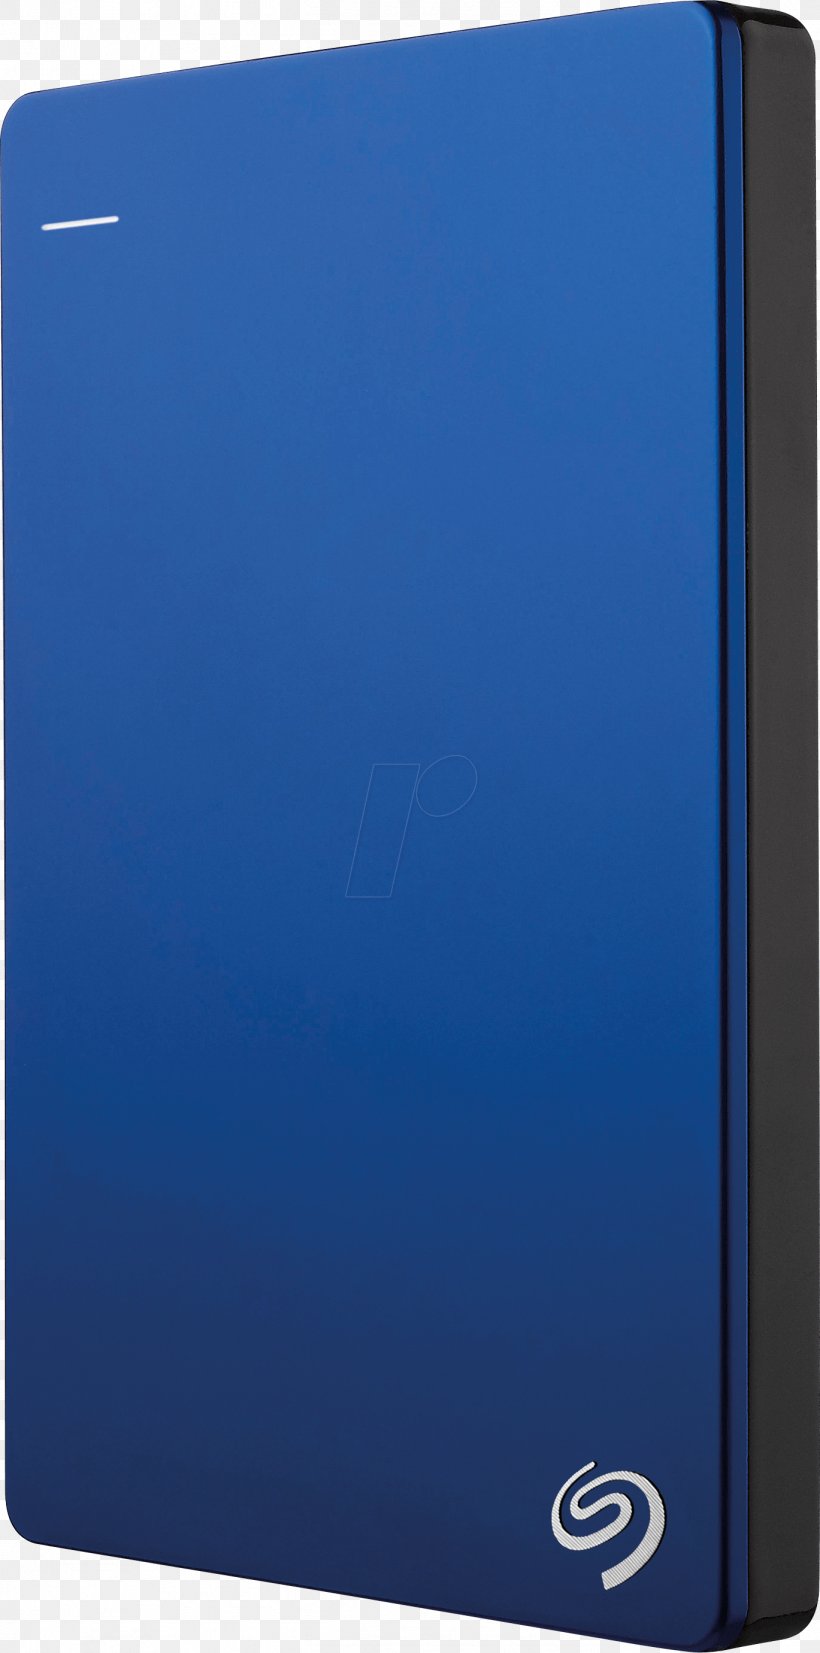 Hard Drives Backup Terabyte Computer Disk Enclosure, PNG, 1369x2761px, Hard Drives, Backup, Blue, Computer, Computer Accessory Download Free